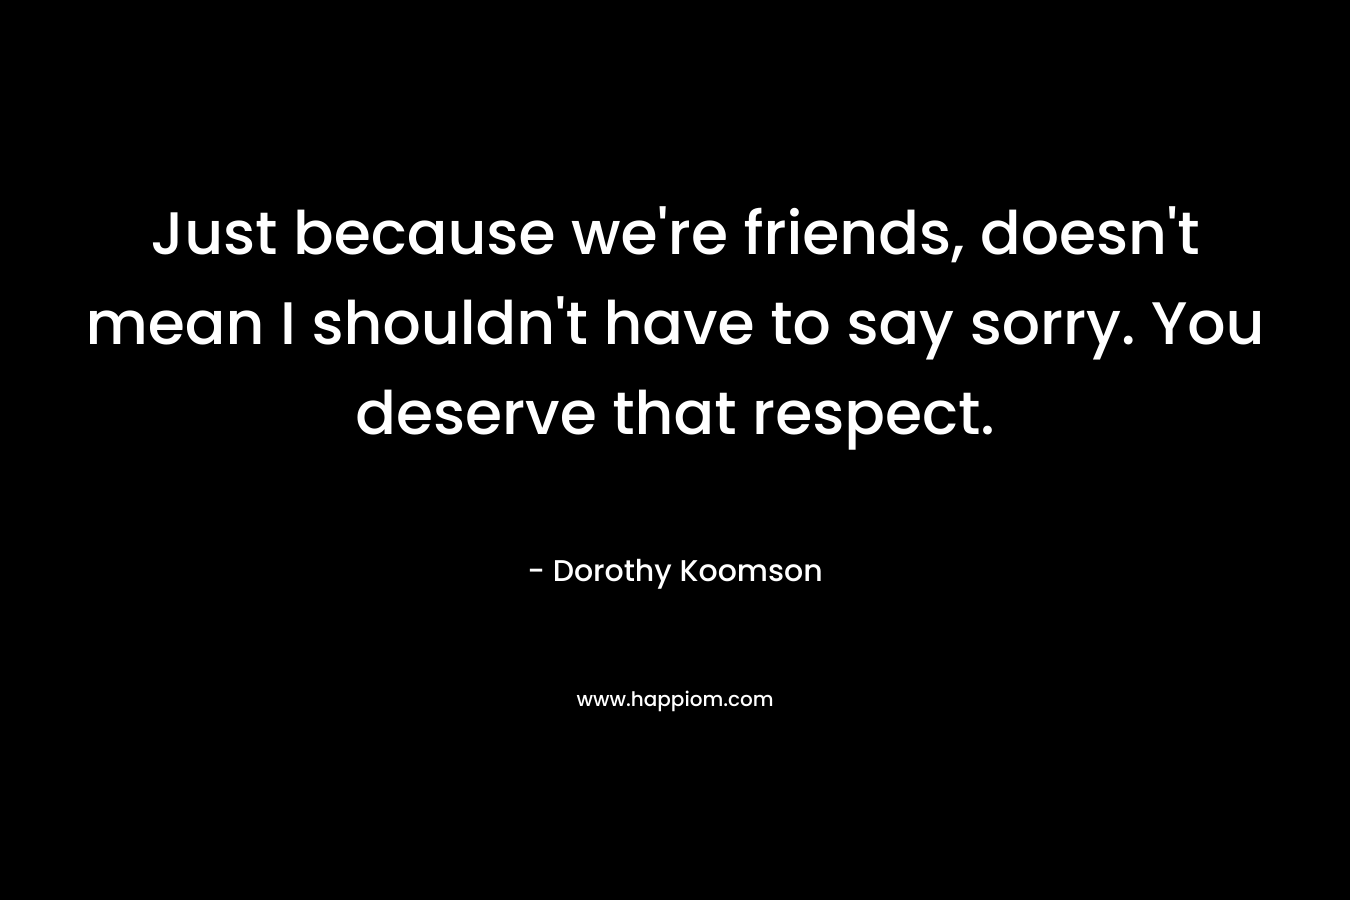 Just because we’re friends, doesn’t mean I shouldn’t have to say sorry. You deserve that respect. – Dorothy Koomson